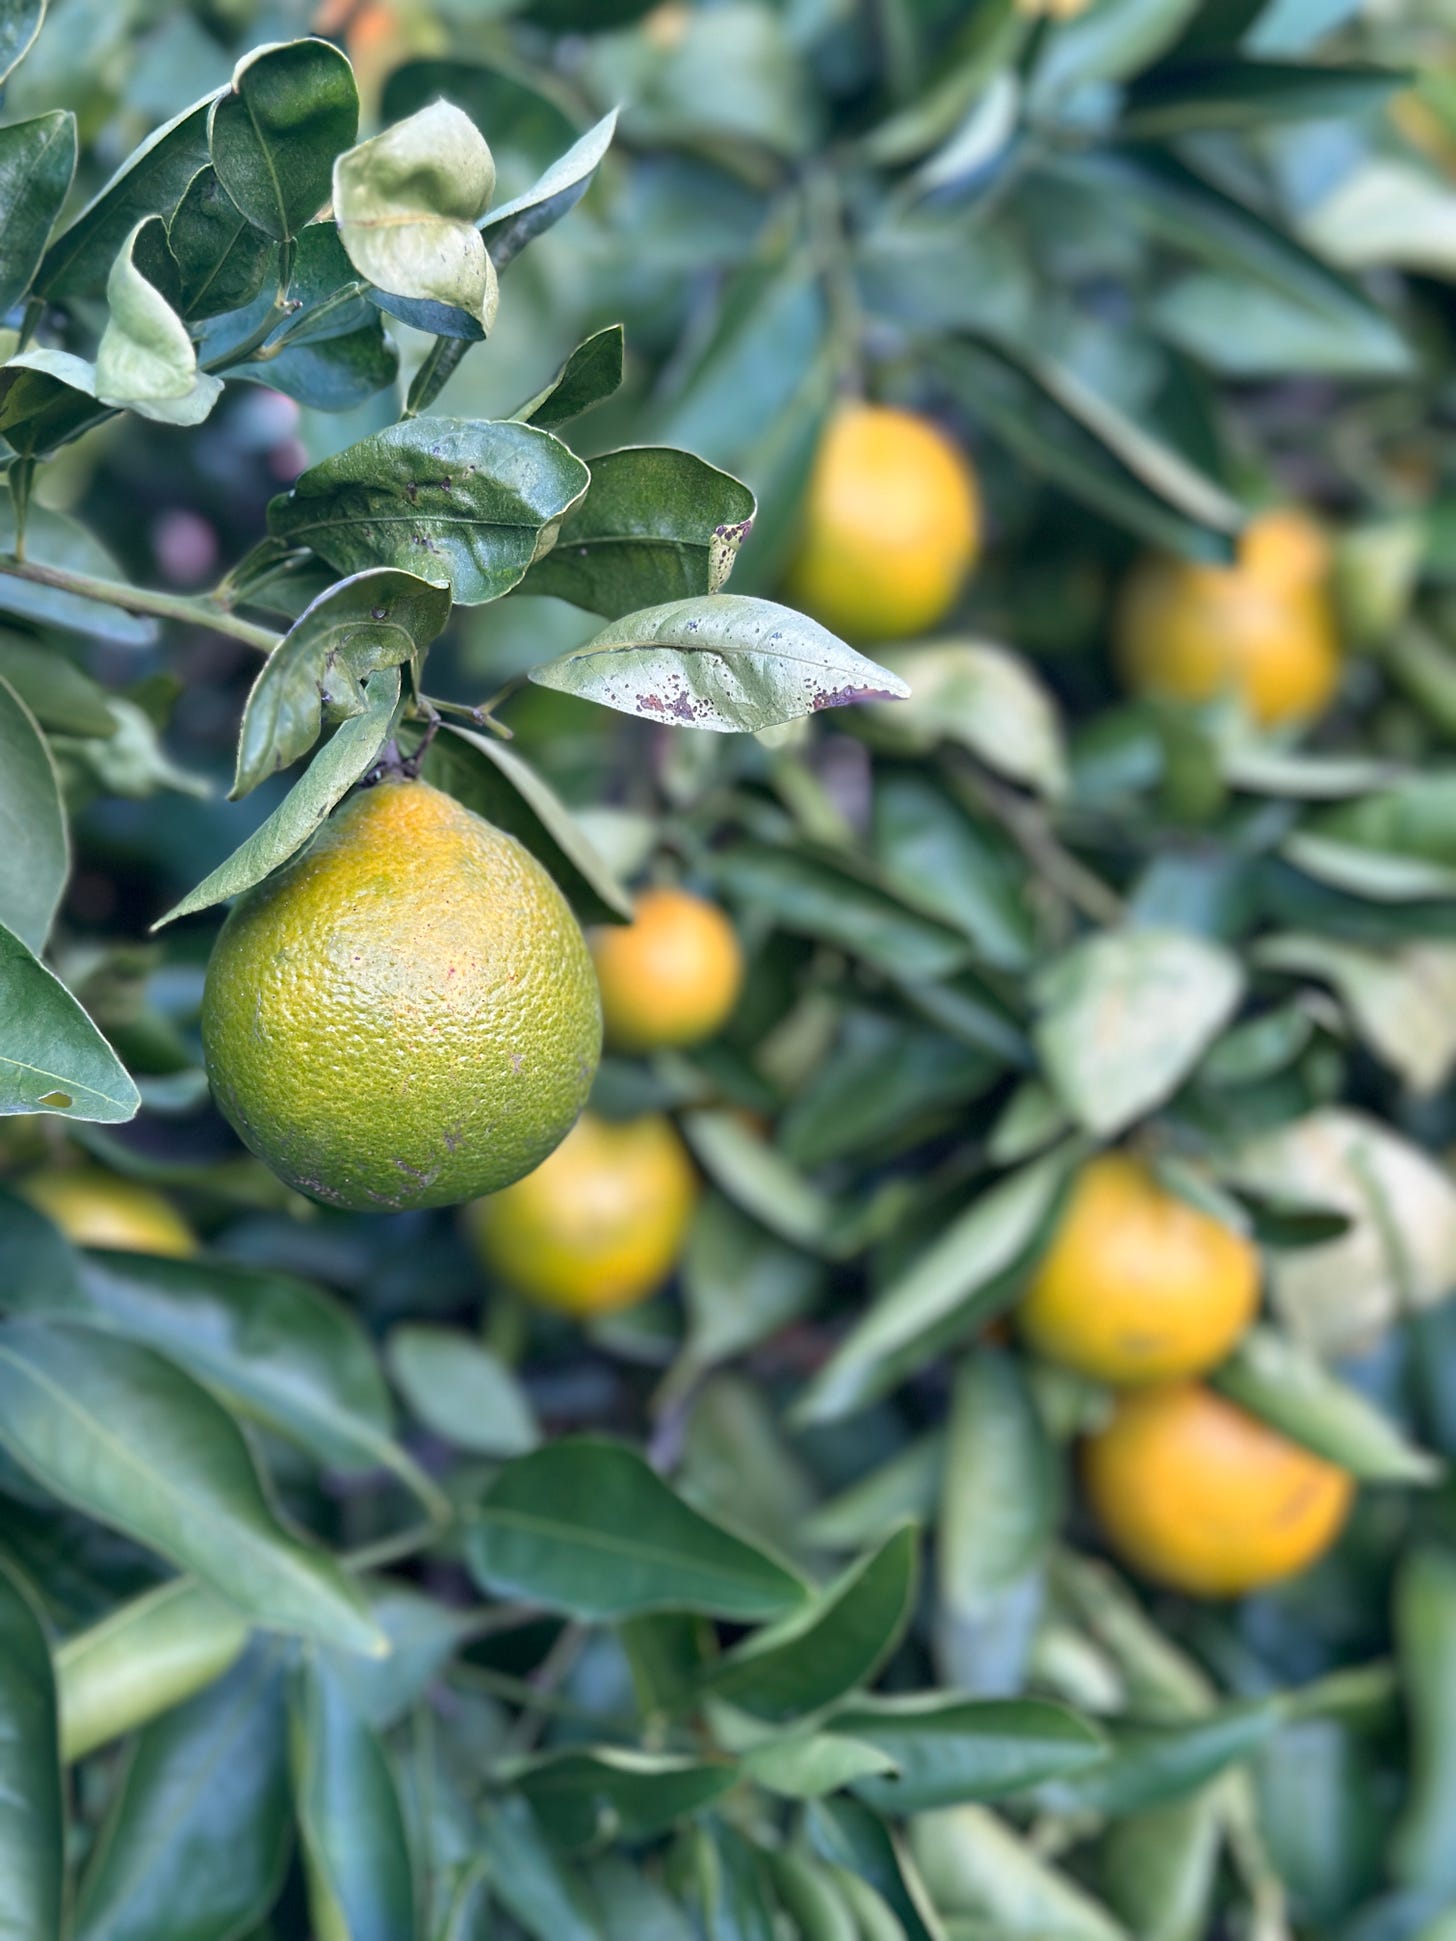 close-up of a green-yellow grapefruit ripening on a tree, more yellow grapefruits in the background